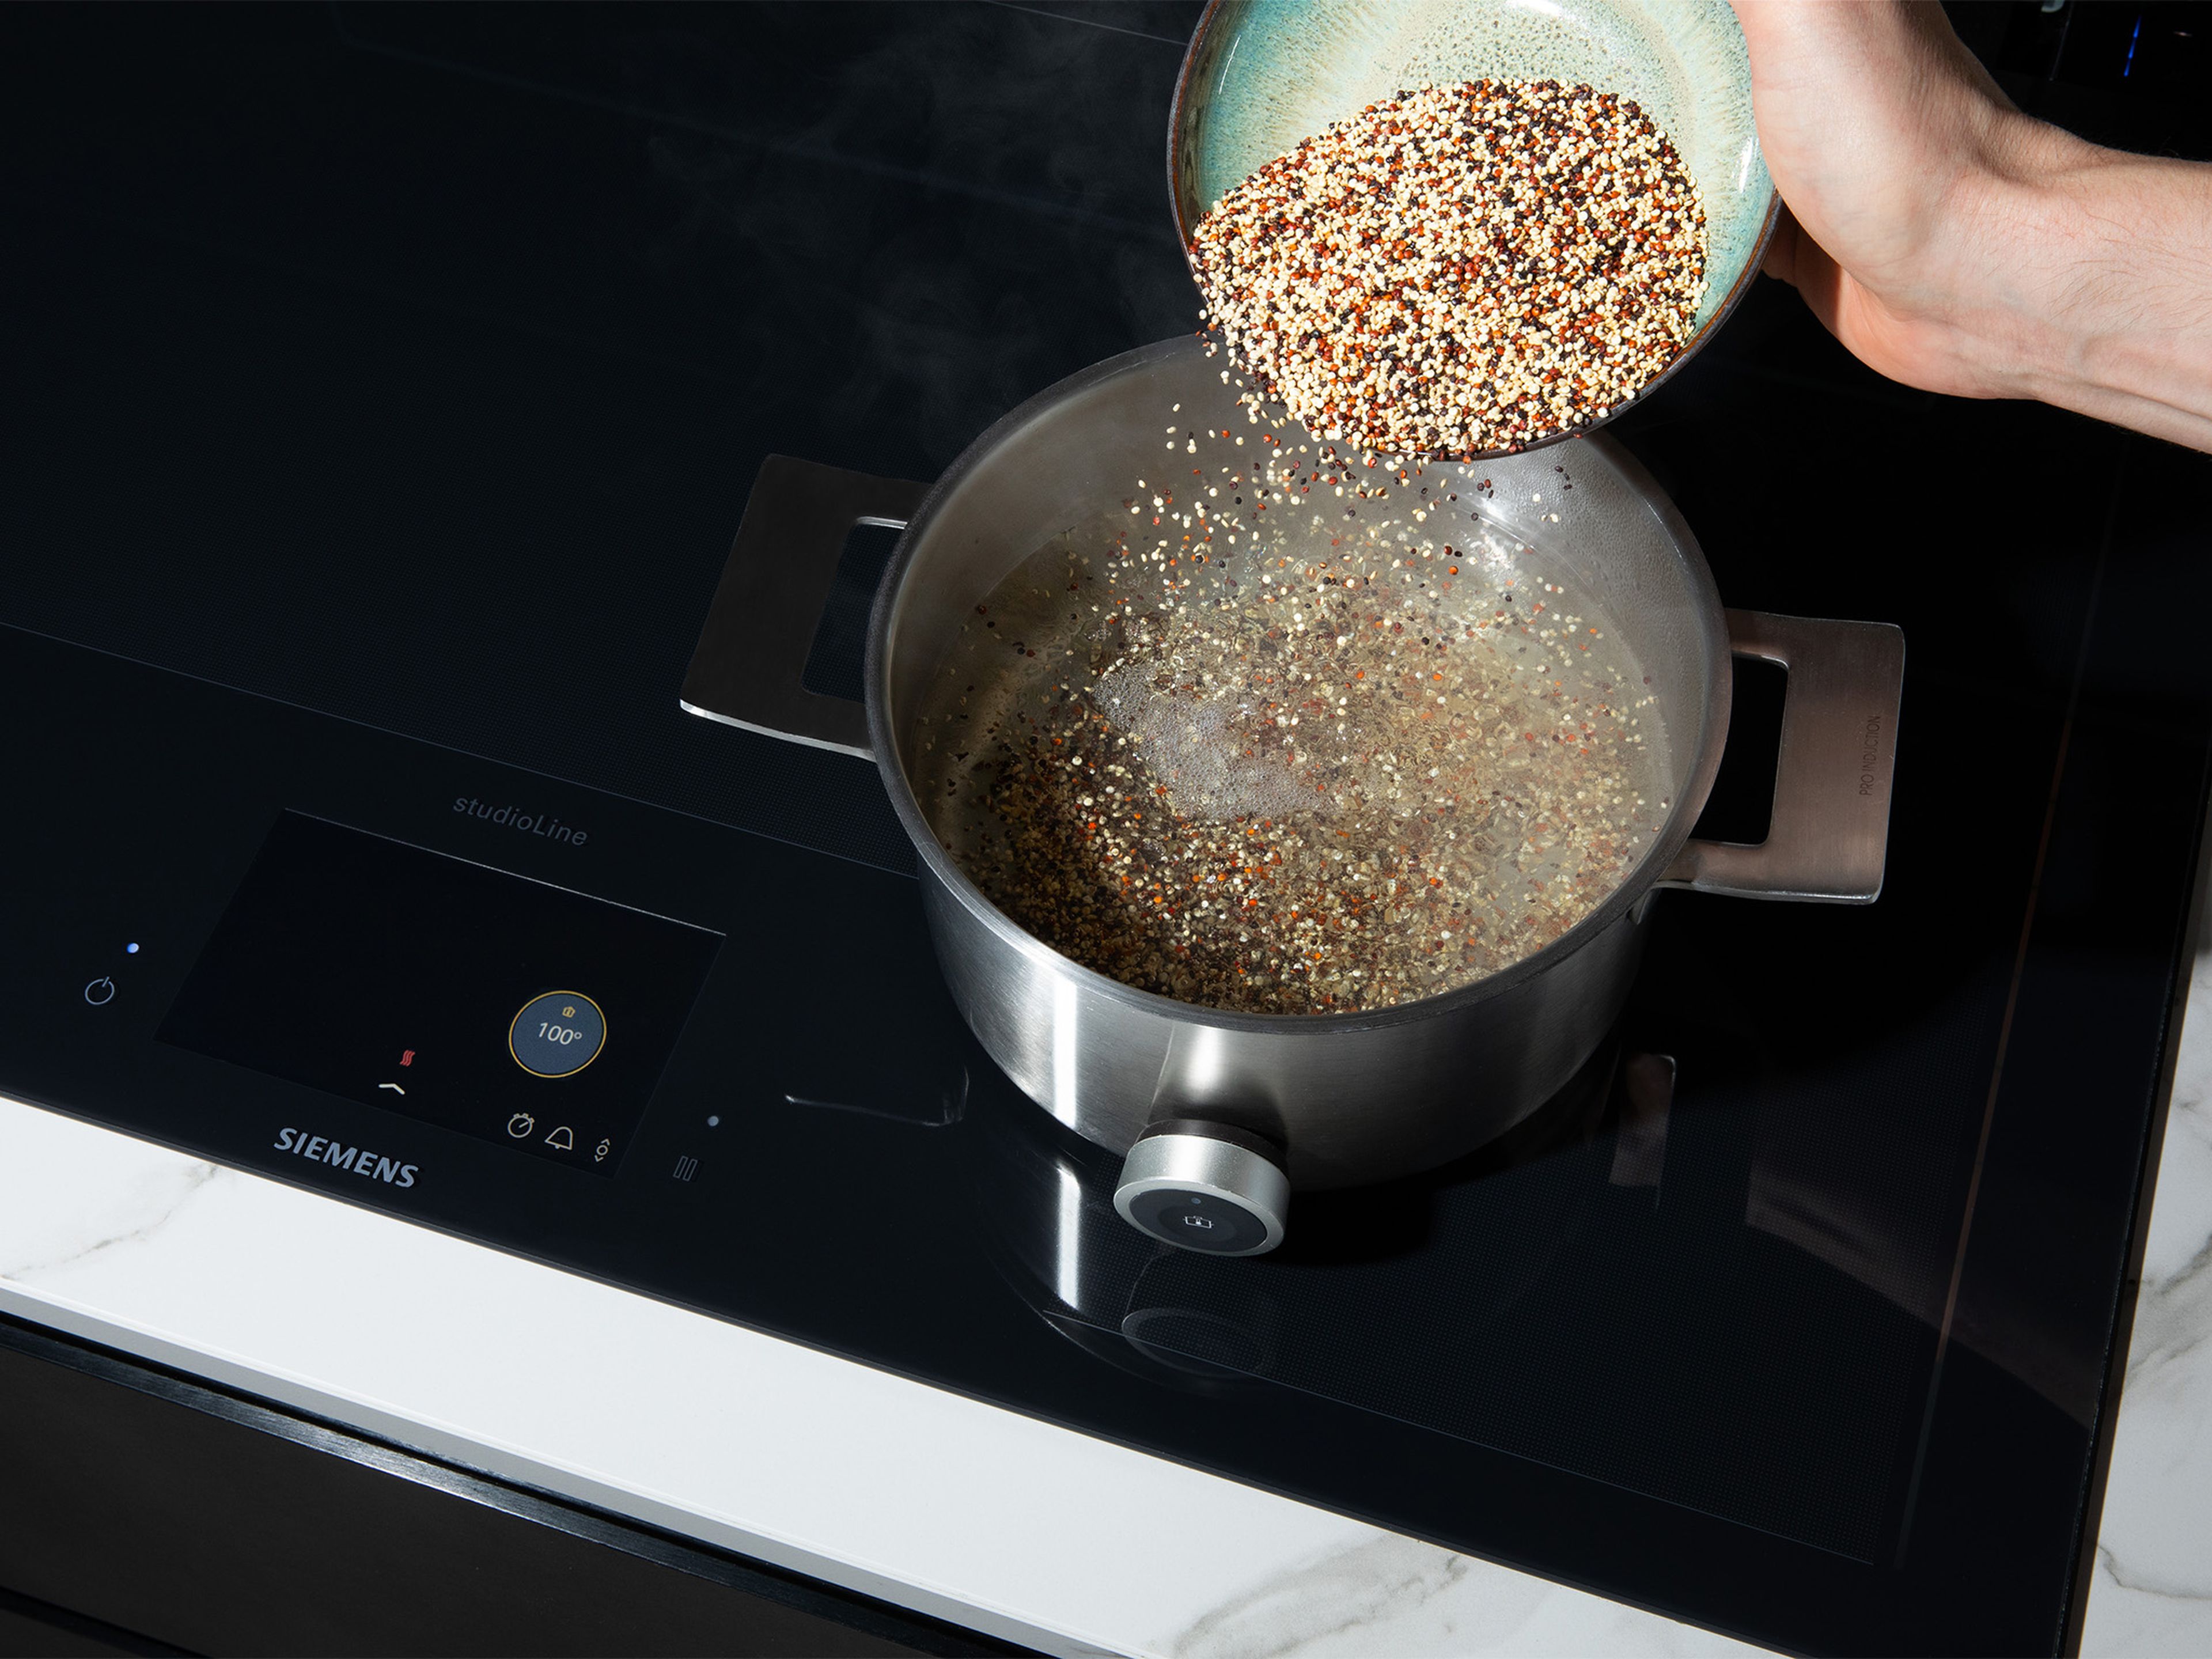 In the meantime, rinse the quinoa under cold water in a sieve. Add water to a small pot and bring to a boil, add a pinch of salt and the rinsed quinoa. Let simmer over medium heat for approx. 15 min., or until the quinoa is cooked. Fluff with a fork and set aside.